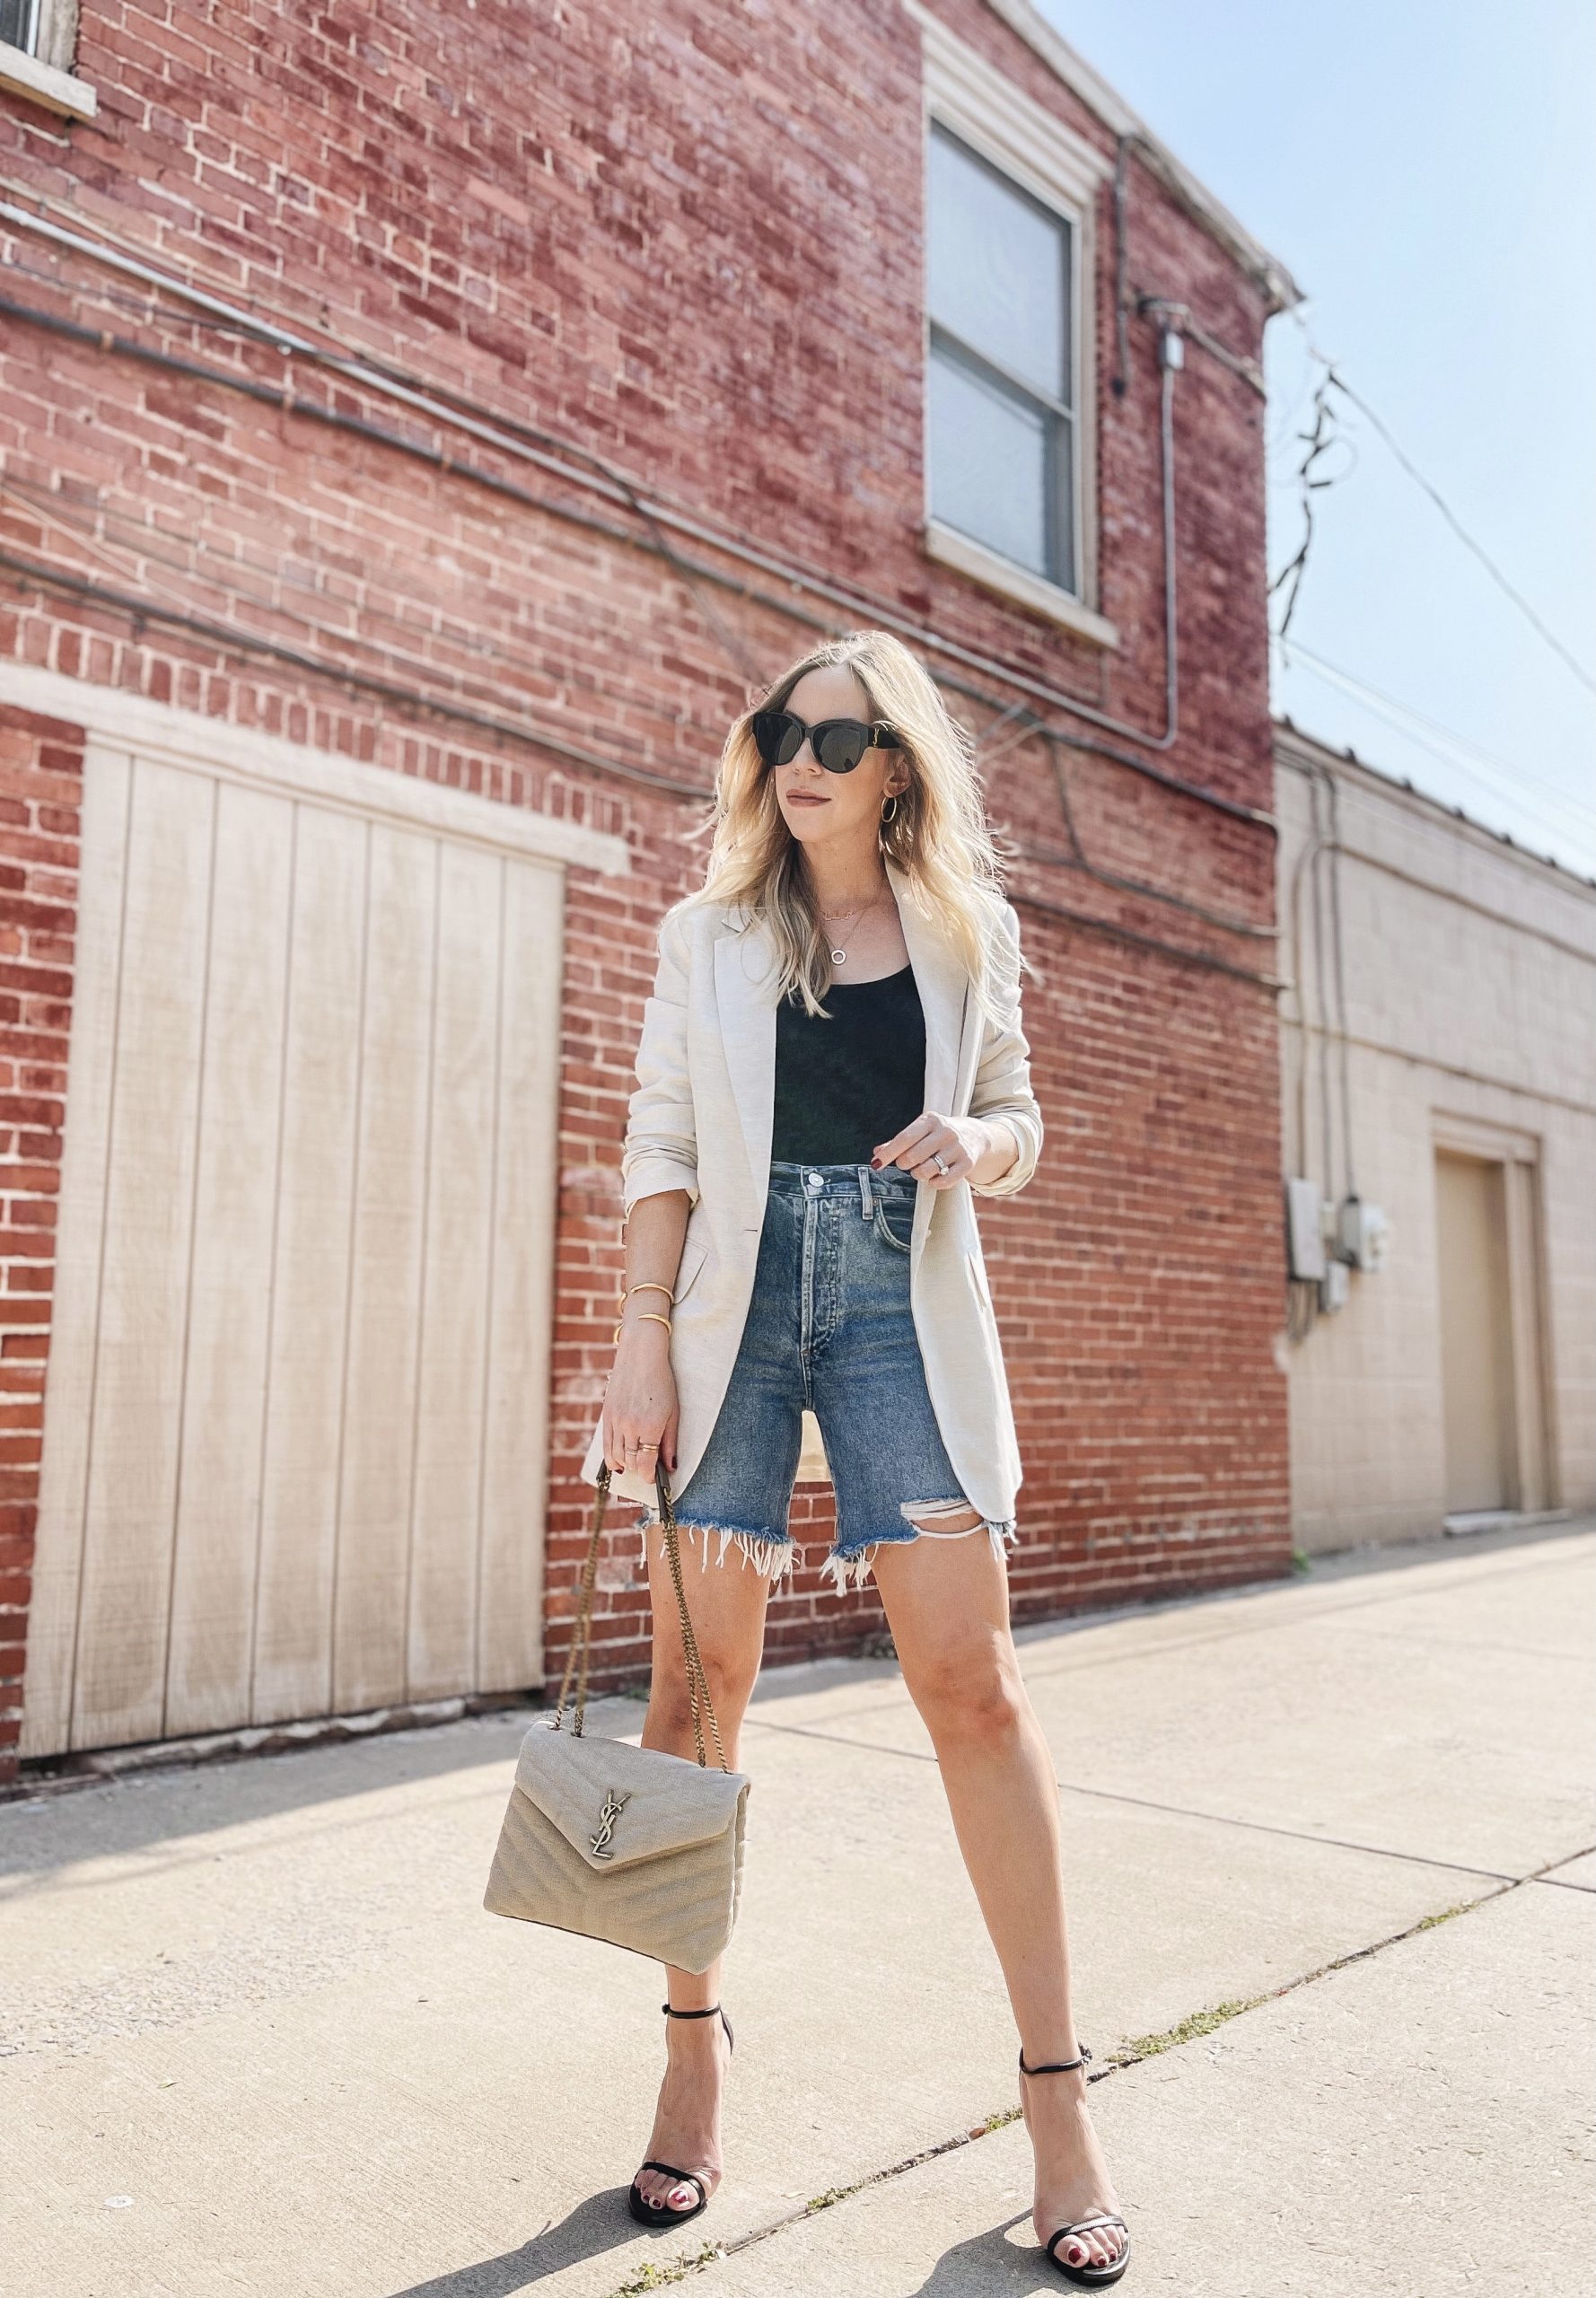 Style Black Shorts With a Bodysuit, Oversize Blazer, and Strappy